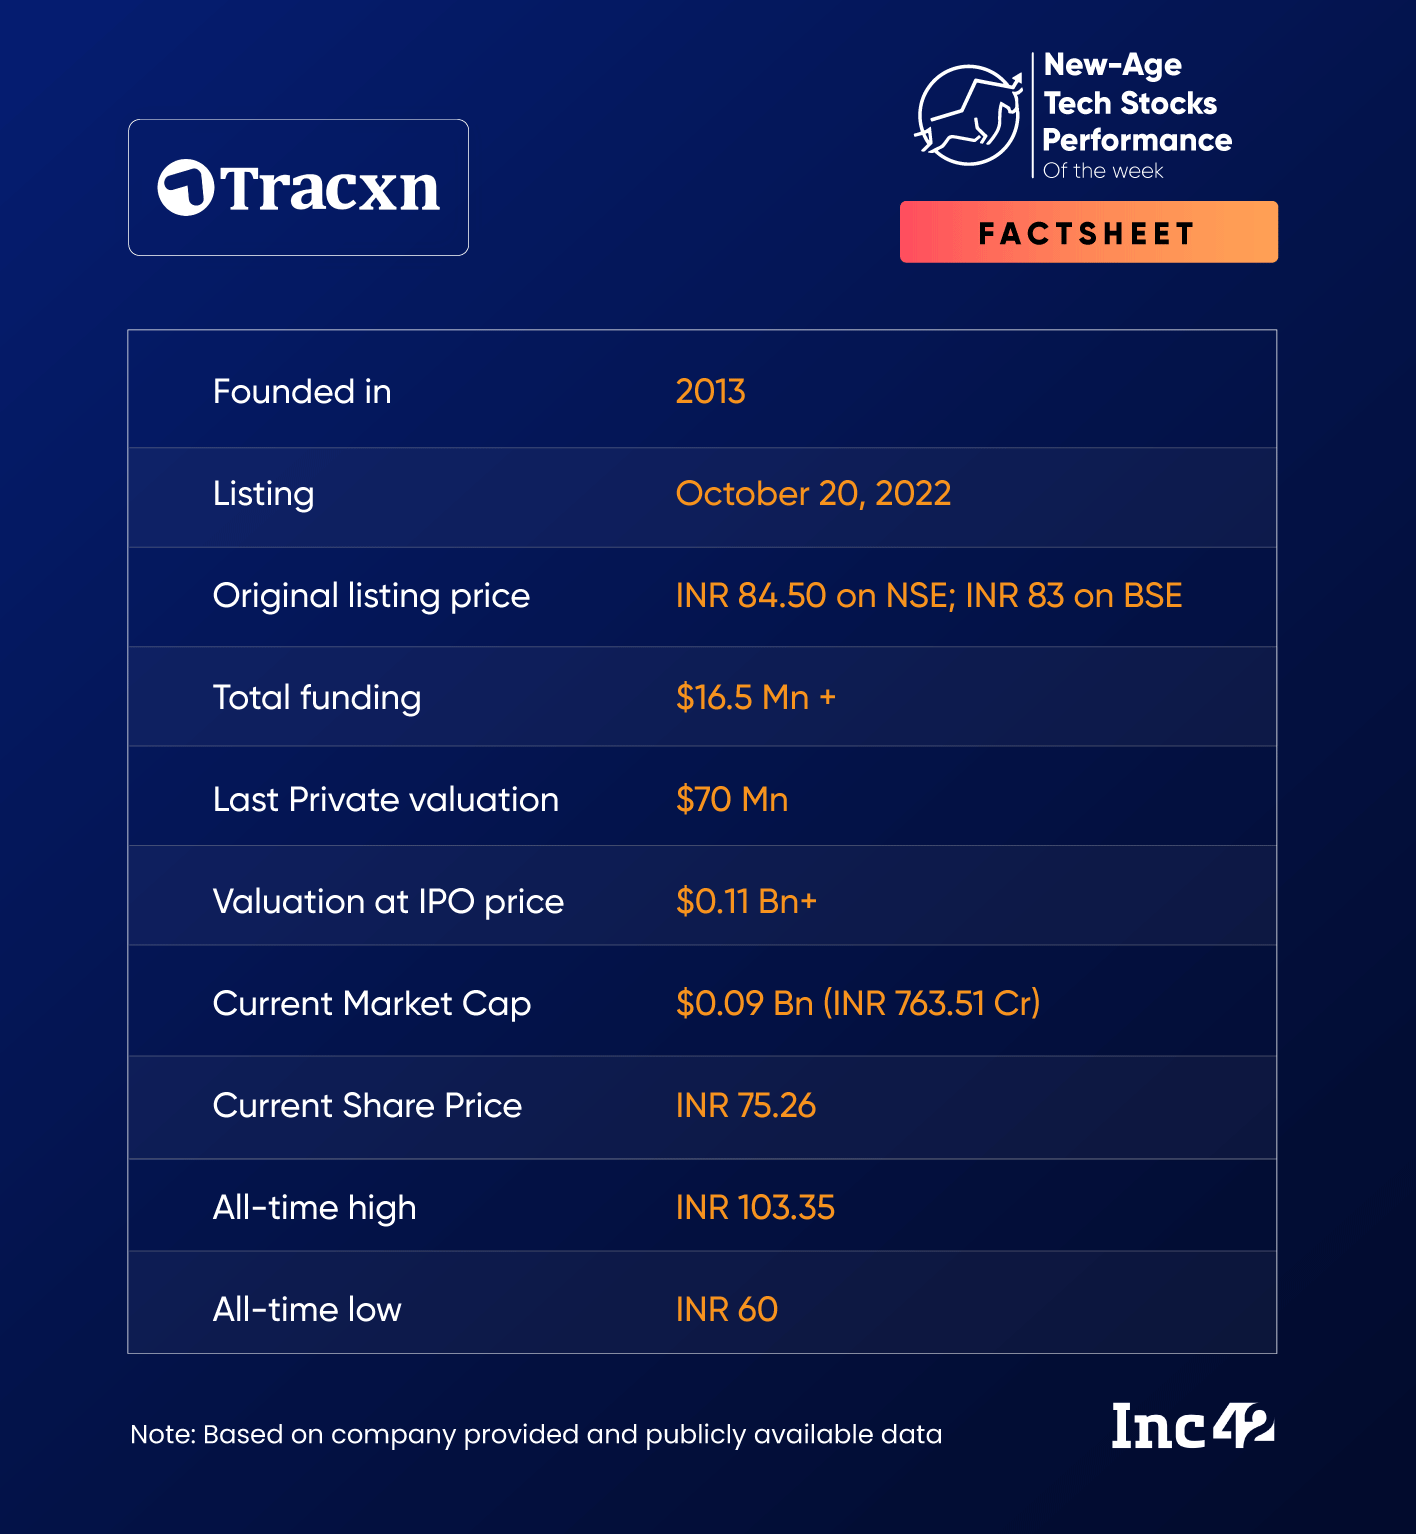 Tracxn Becomes The Biggest Loser